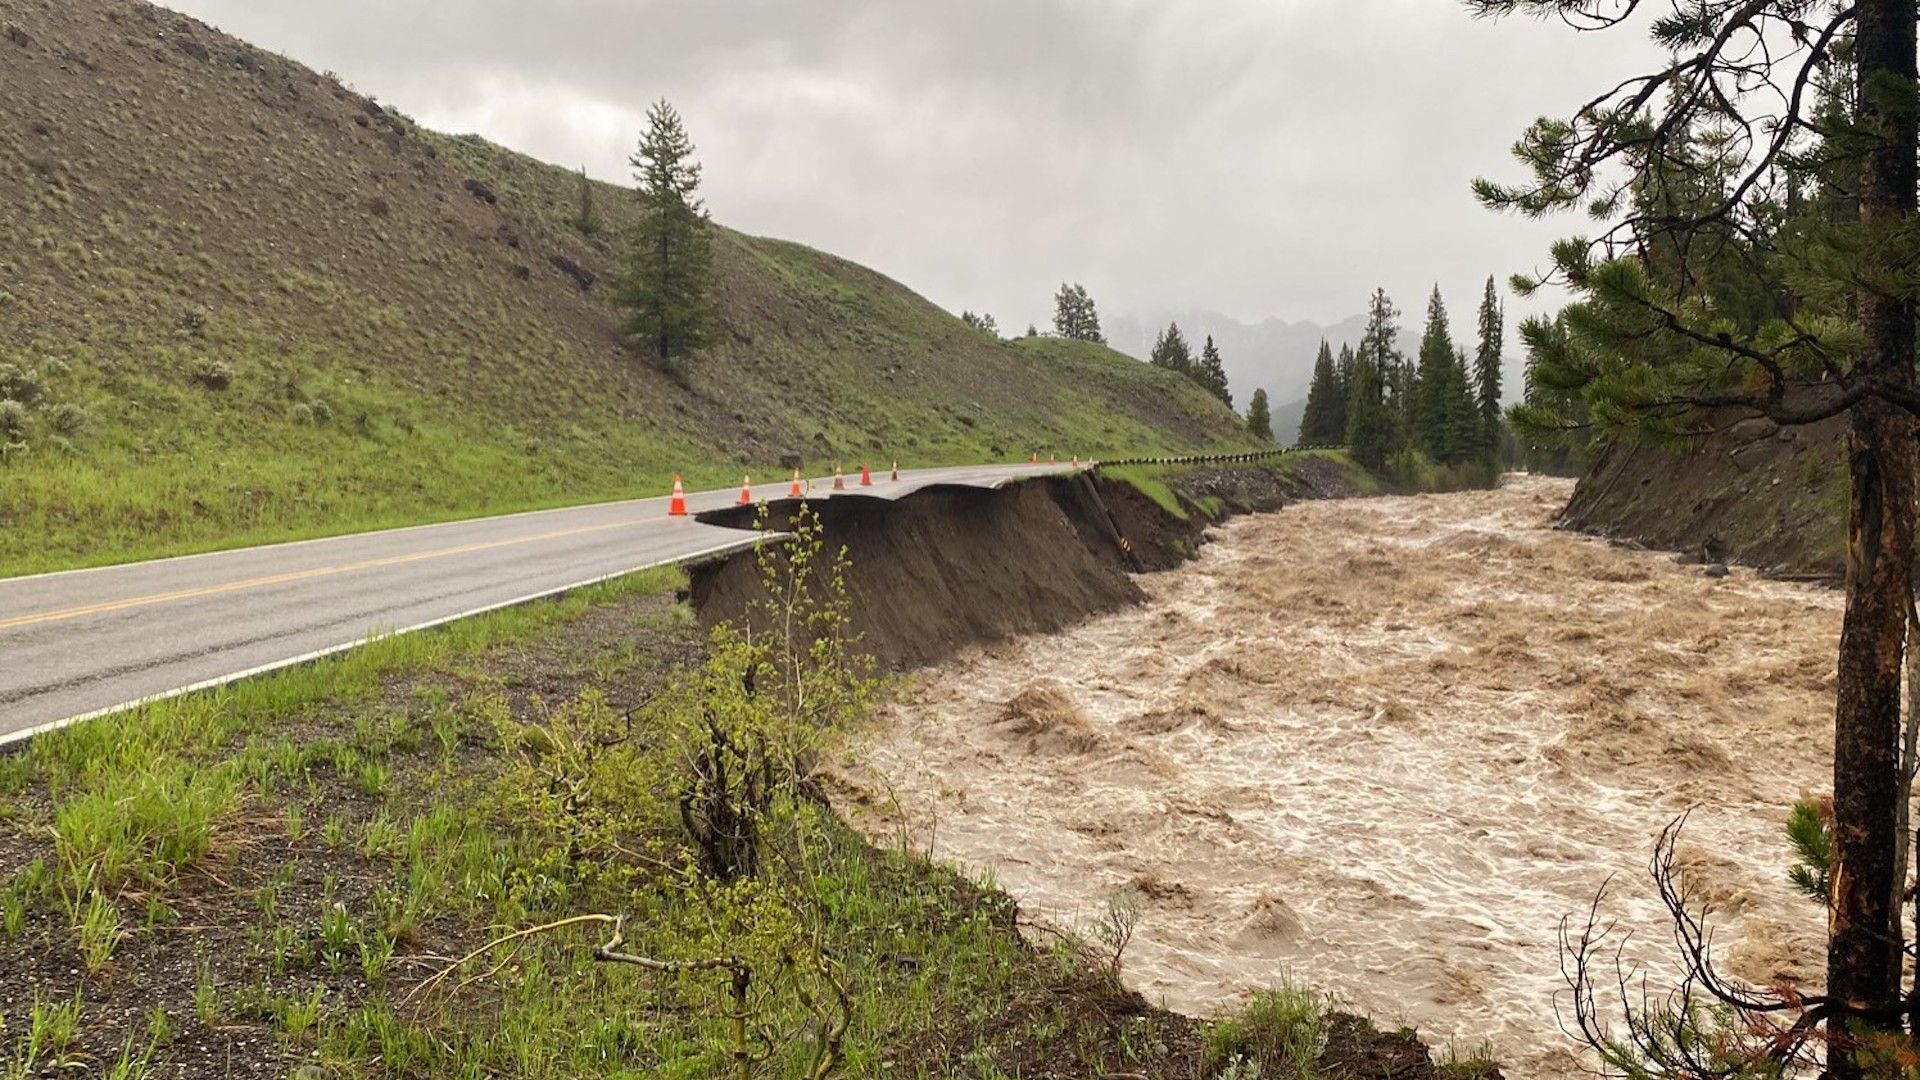 Raging river erodes a road through Yellowstone National Park.